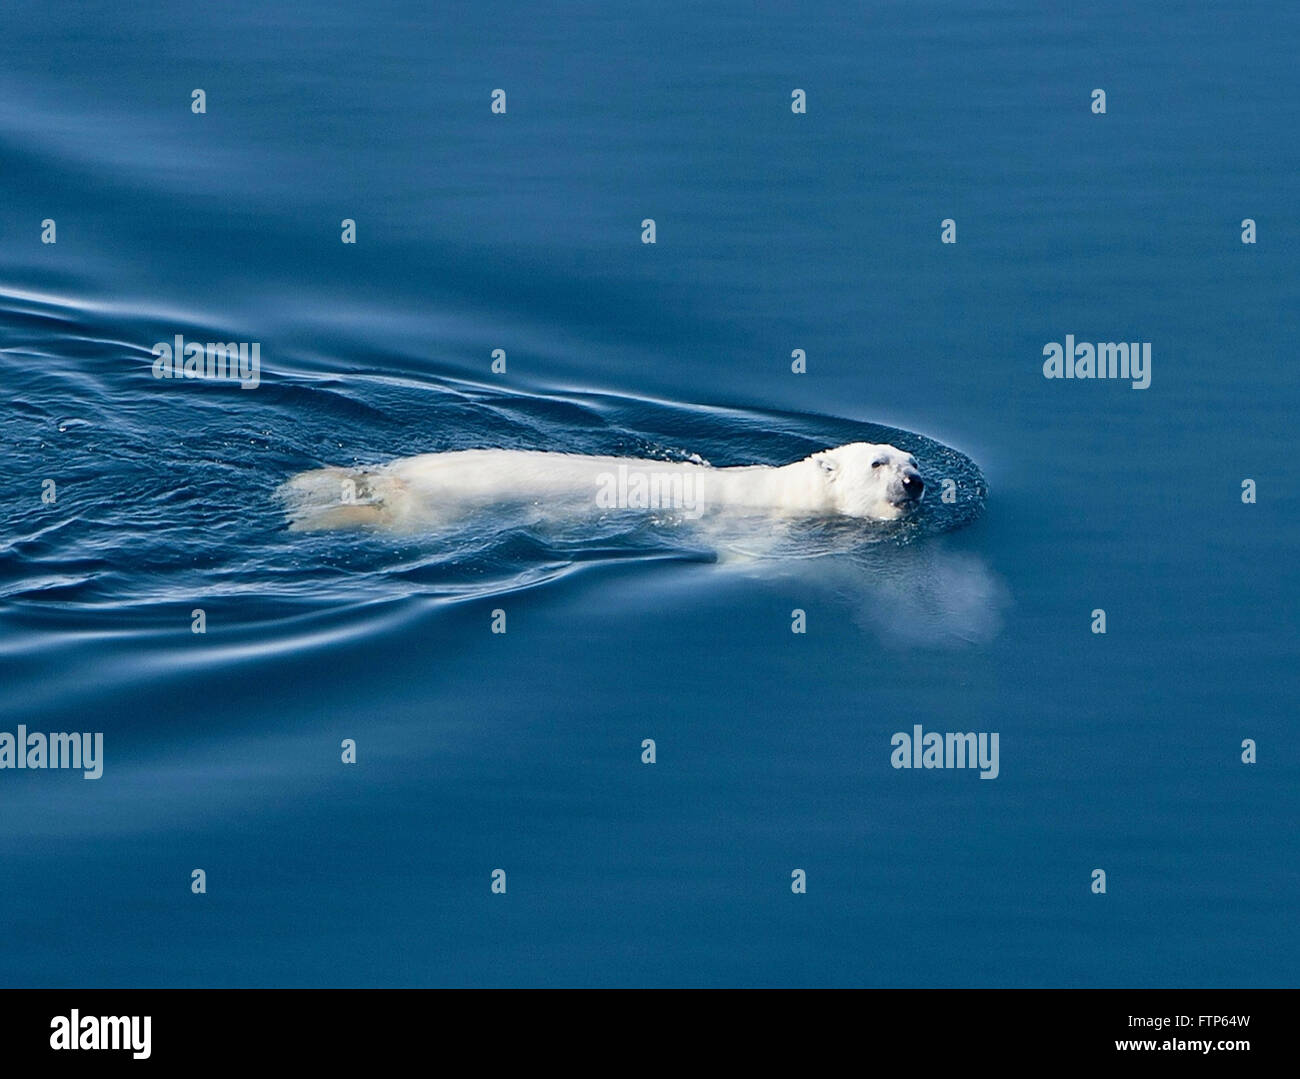 A polar bear swims in open water in the Arctic Ocean off Alaska. The drastic reduction of sea ice has resulted in longer swims for polar bears which can swim 200 miles when necessary. Stock Photo